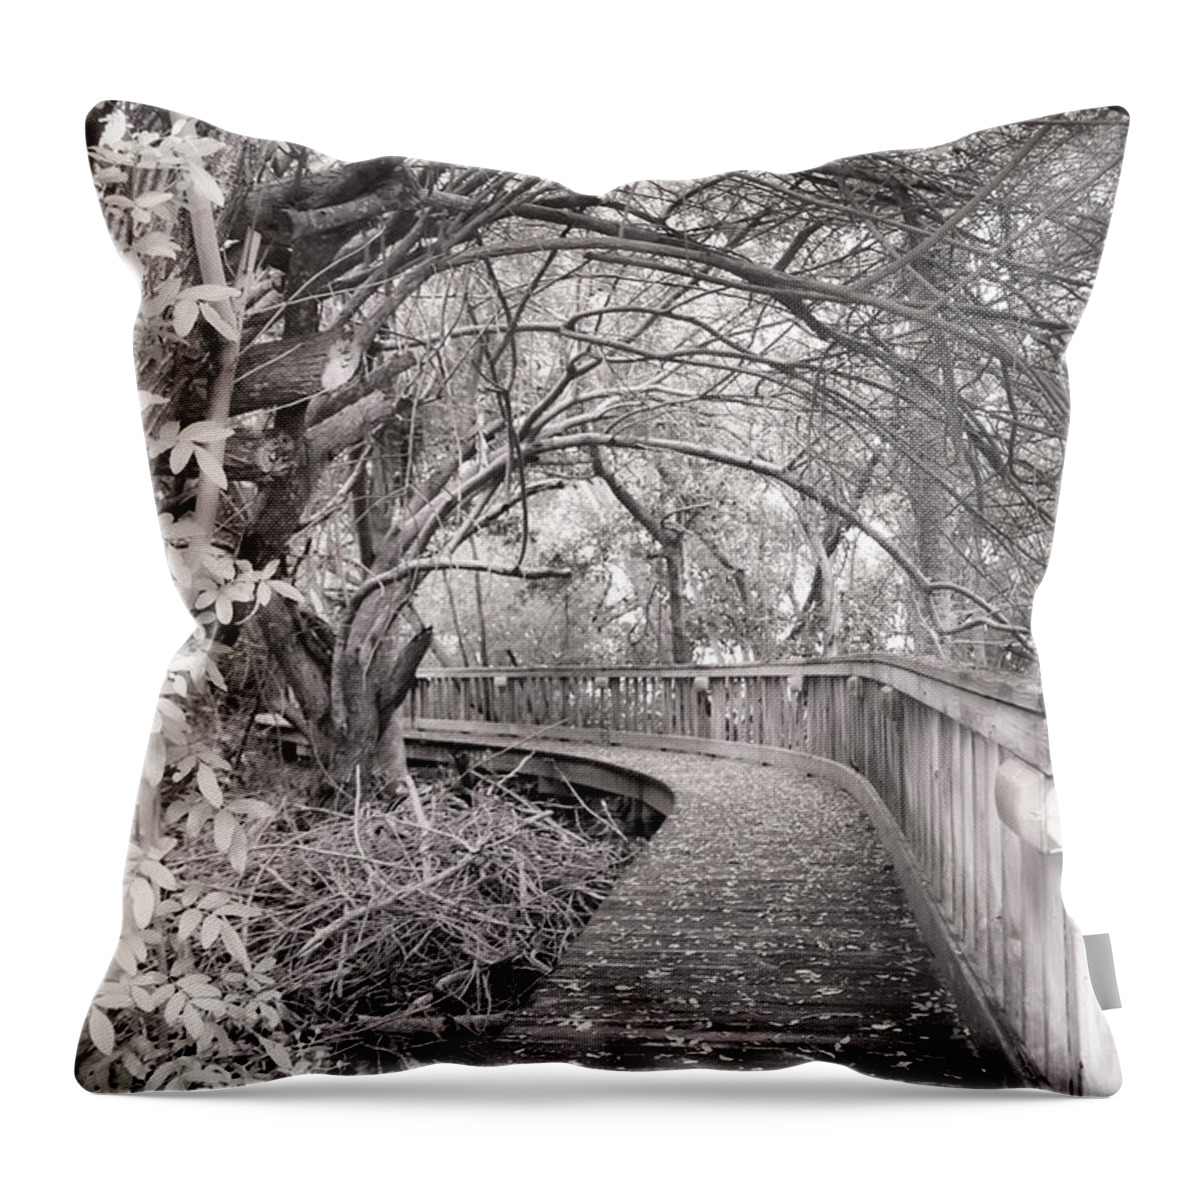 Englewood Throw Pillow featuring the photograph Walkway by Alison Belsan Horton